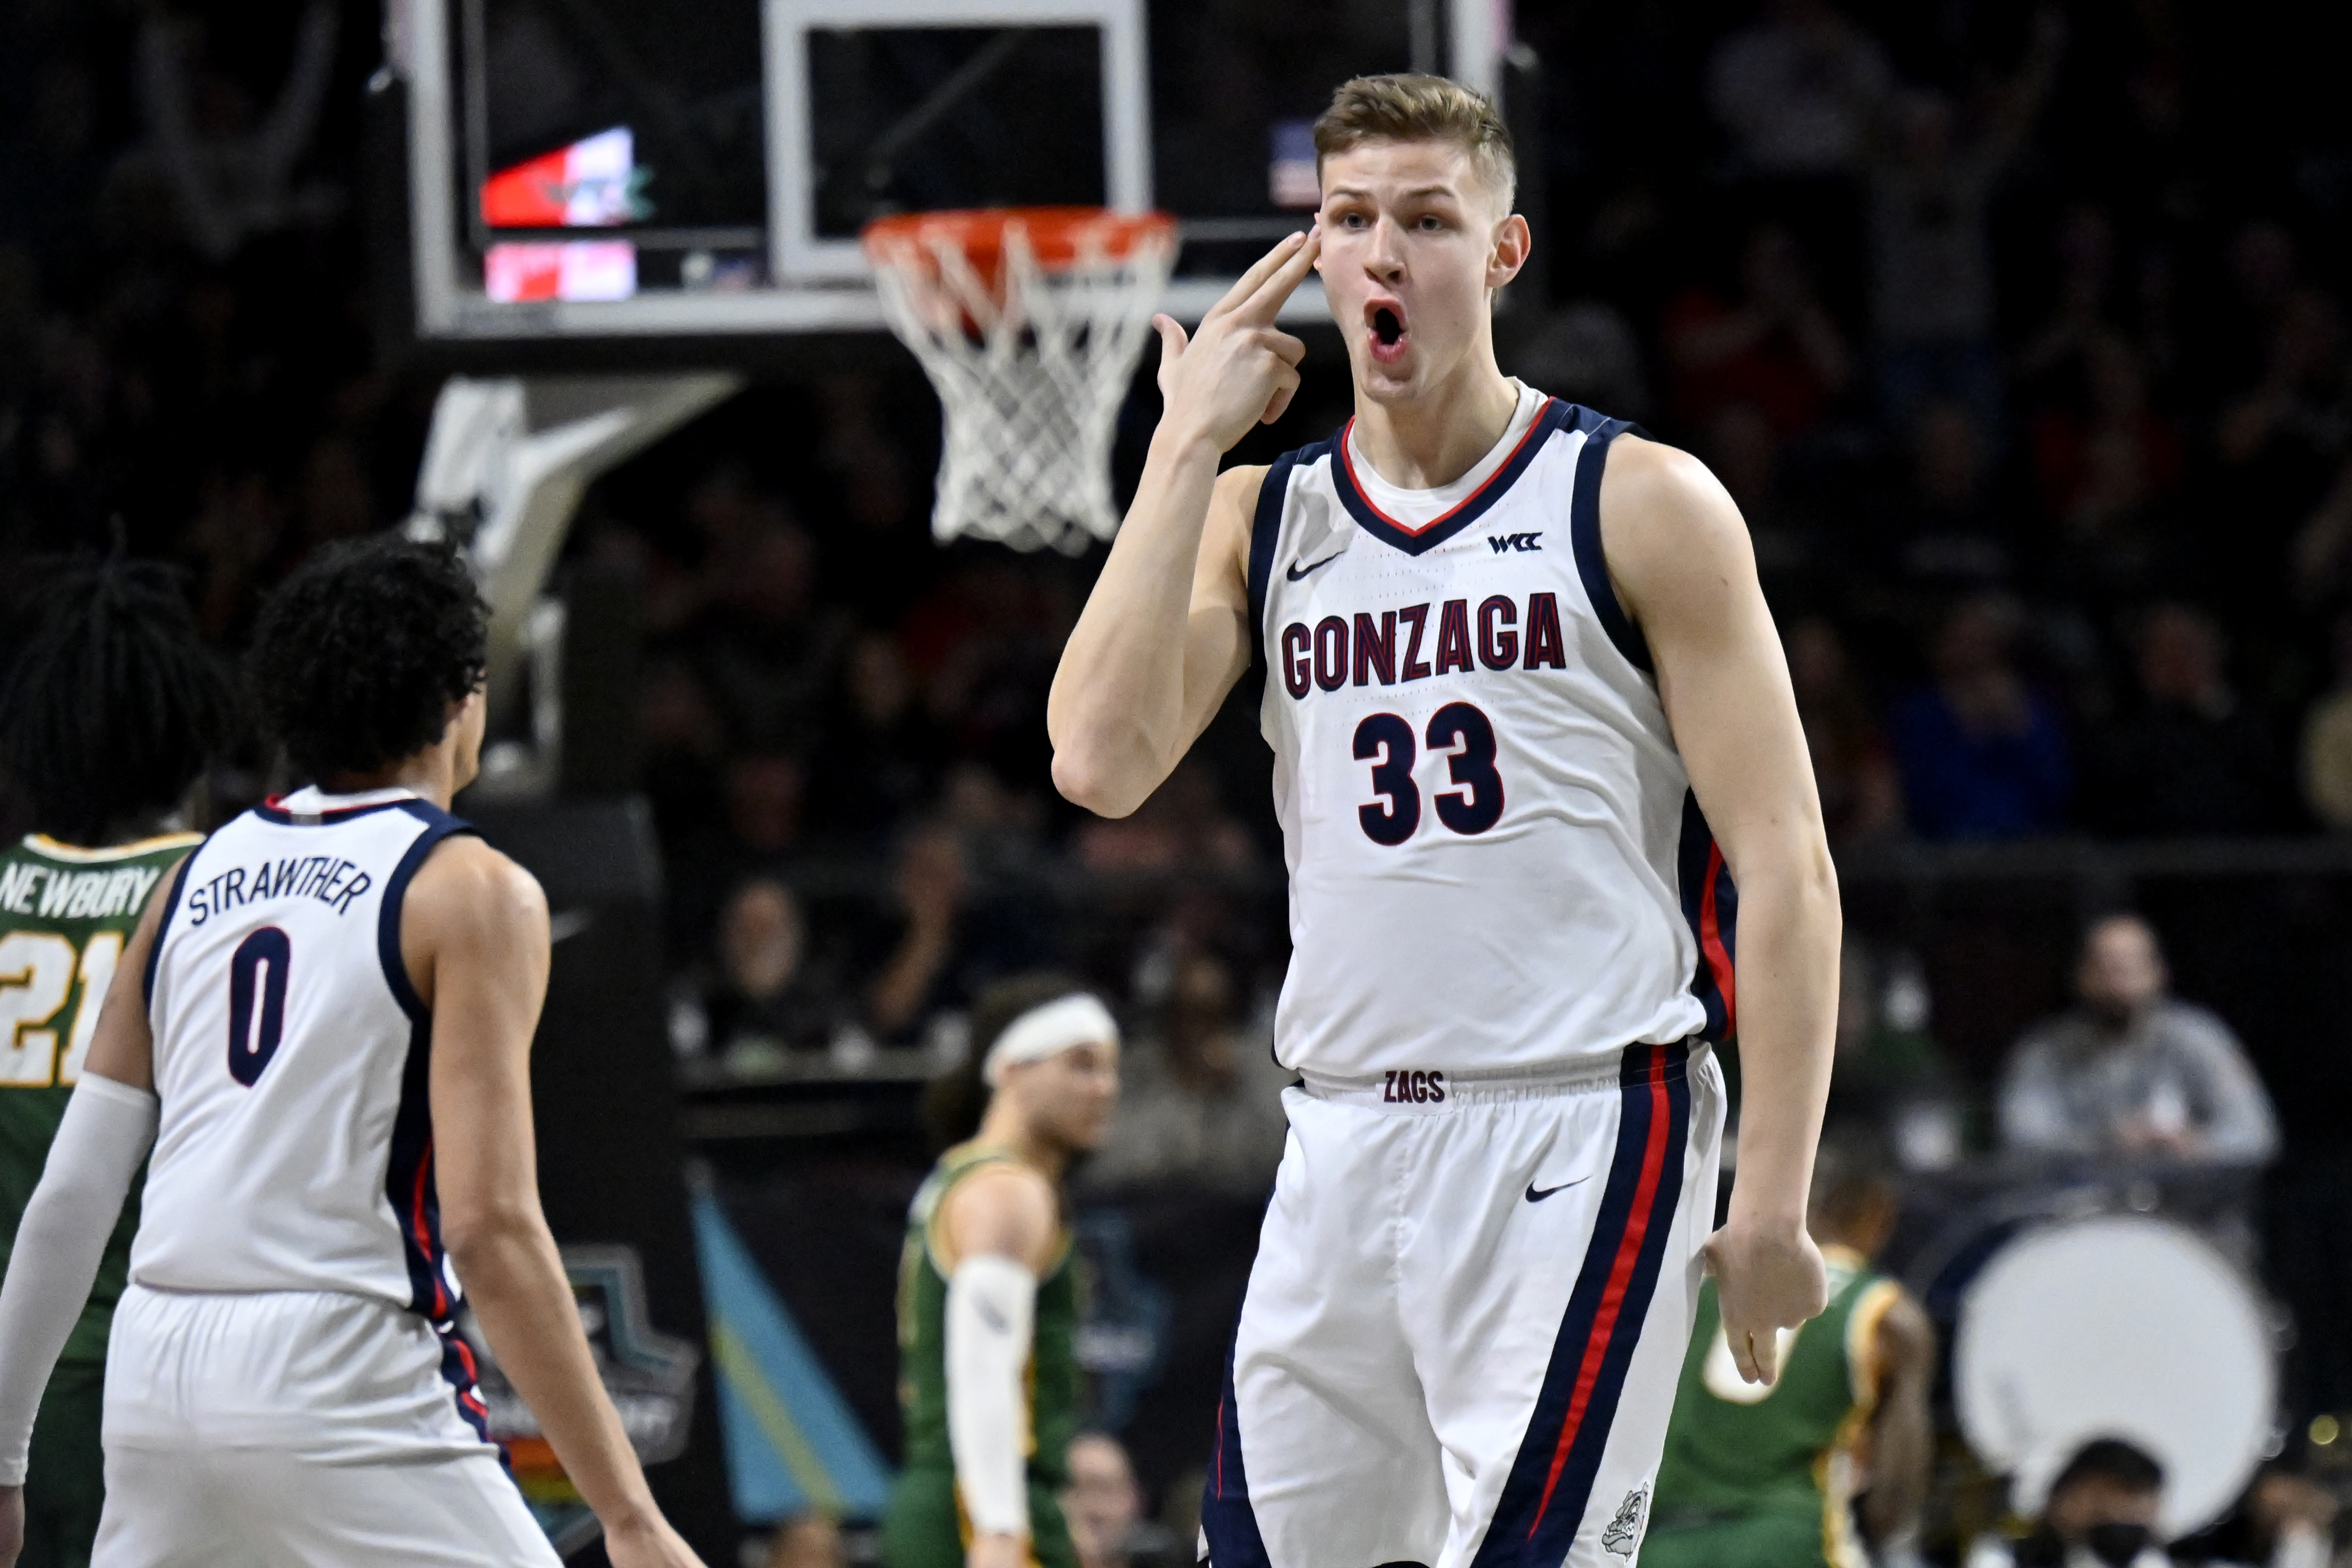 Gonzaga vs Grand Canyon basketball free live stream, TV channel for Round 1 game (3/17/2023)